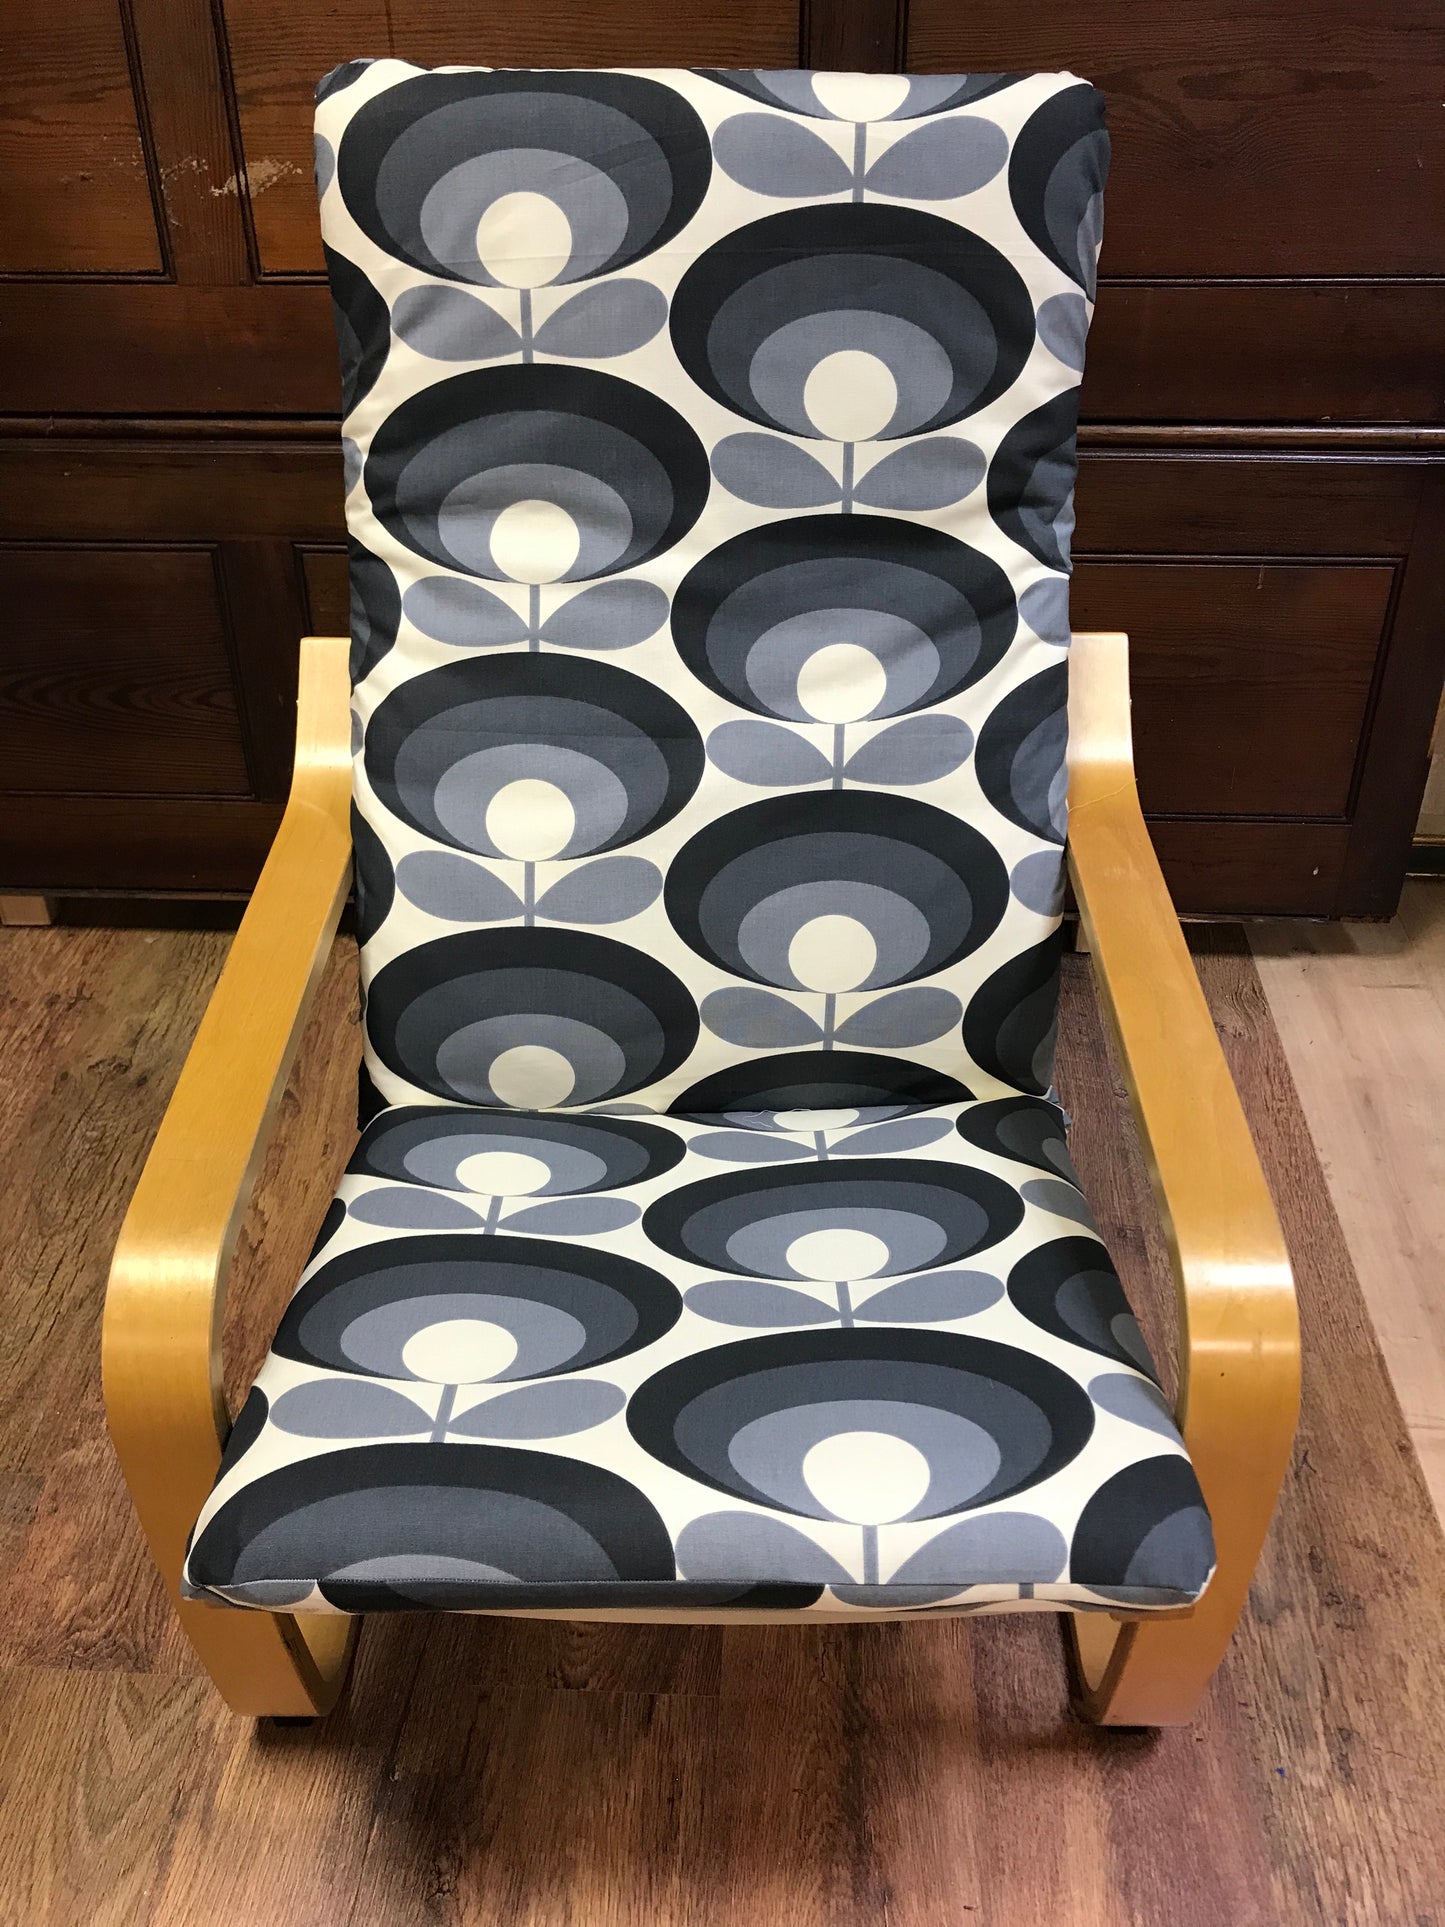 Ikea Poang chair cover in Contemporary Charcoal grey pattern cotton fabric.